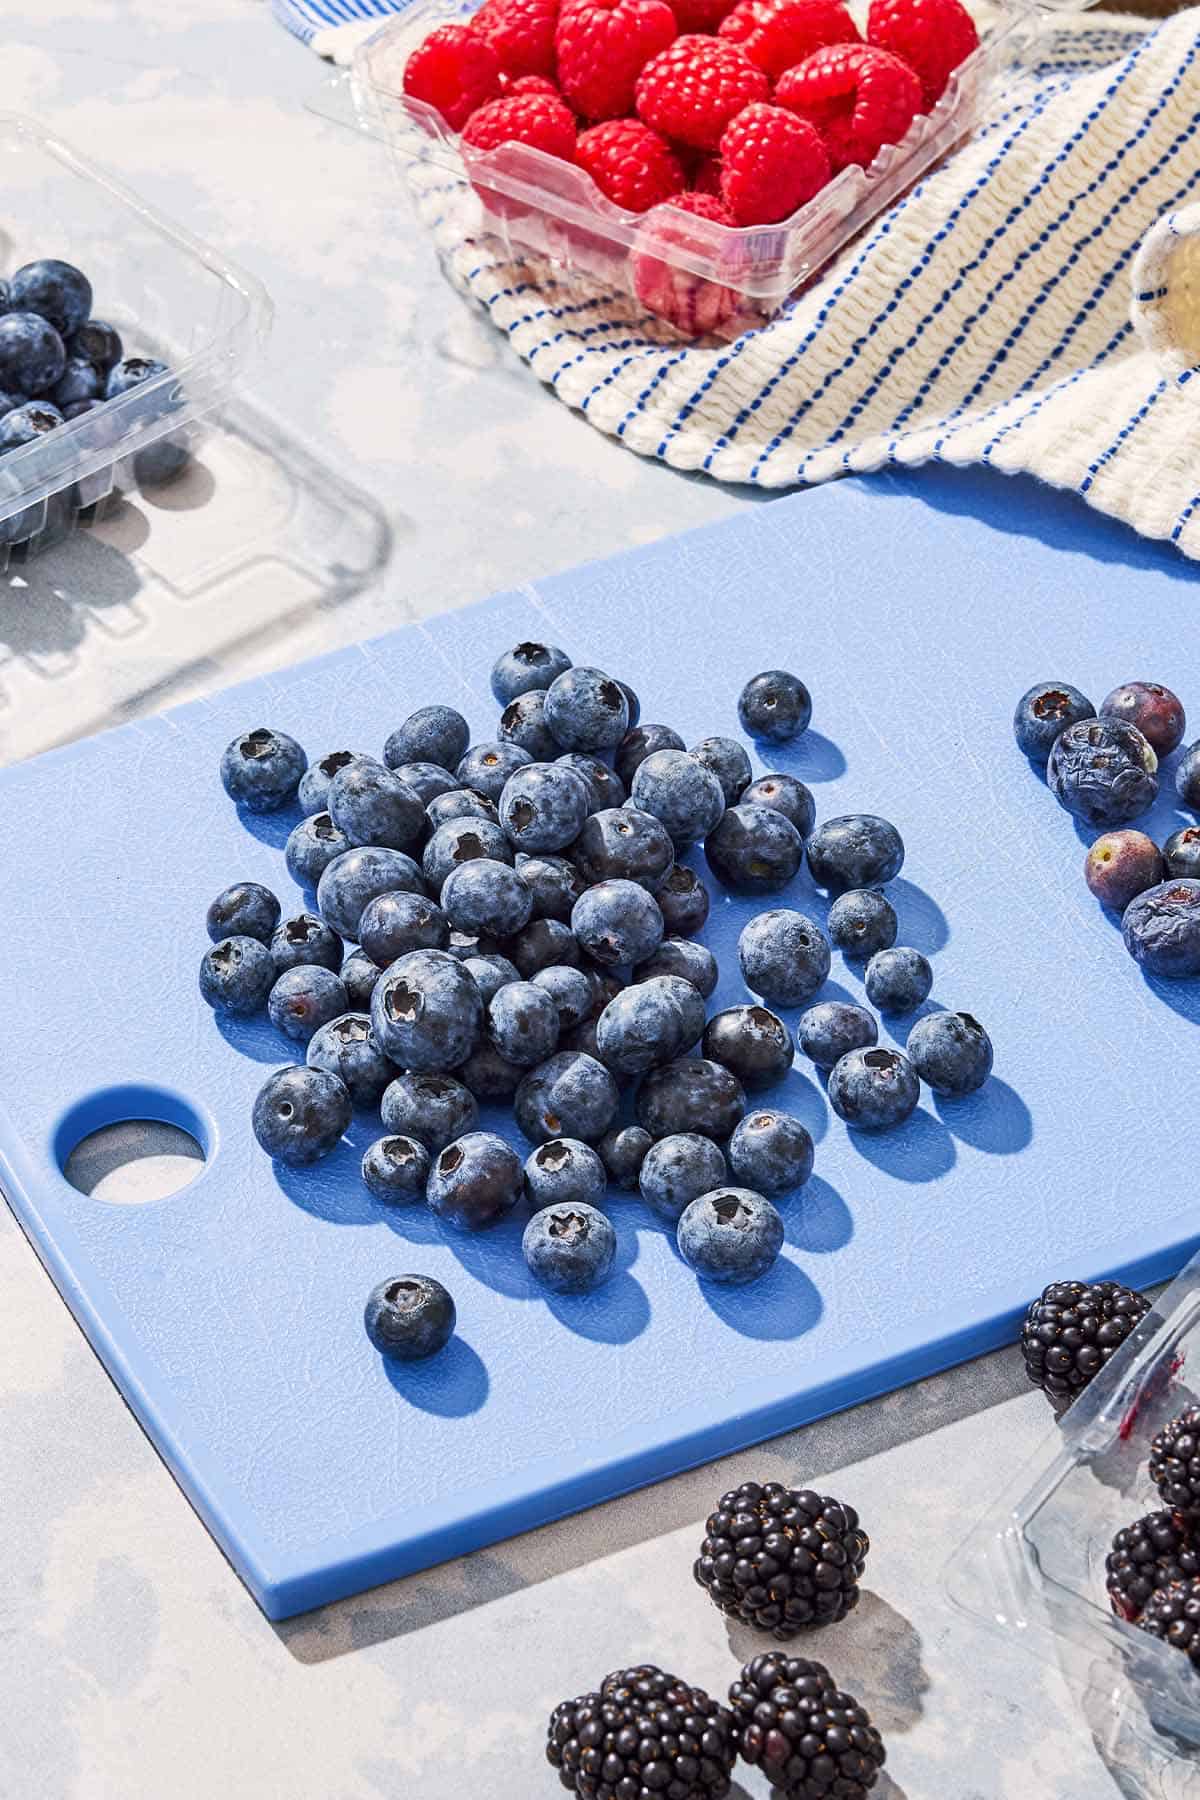 A handful of blueberries on a cutting board. This is surrounded by packs of raspberries, blackberries and more blueberries.